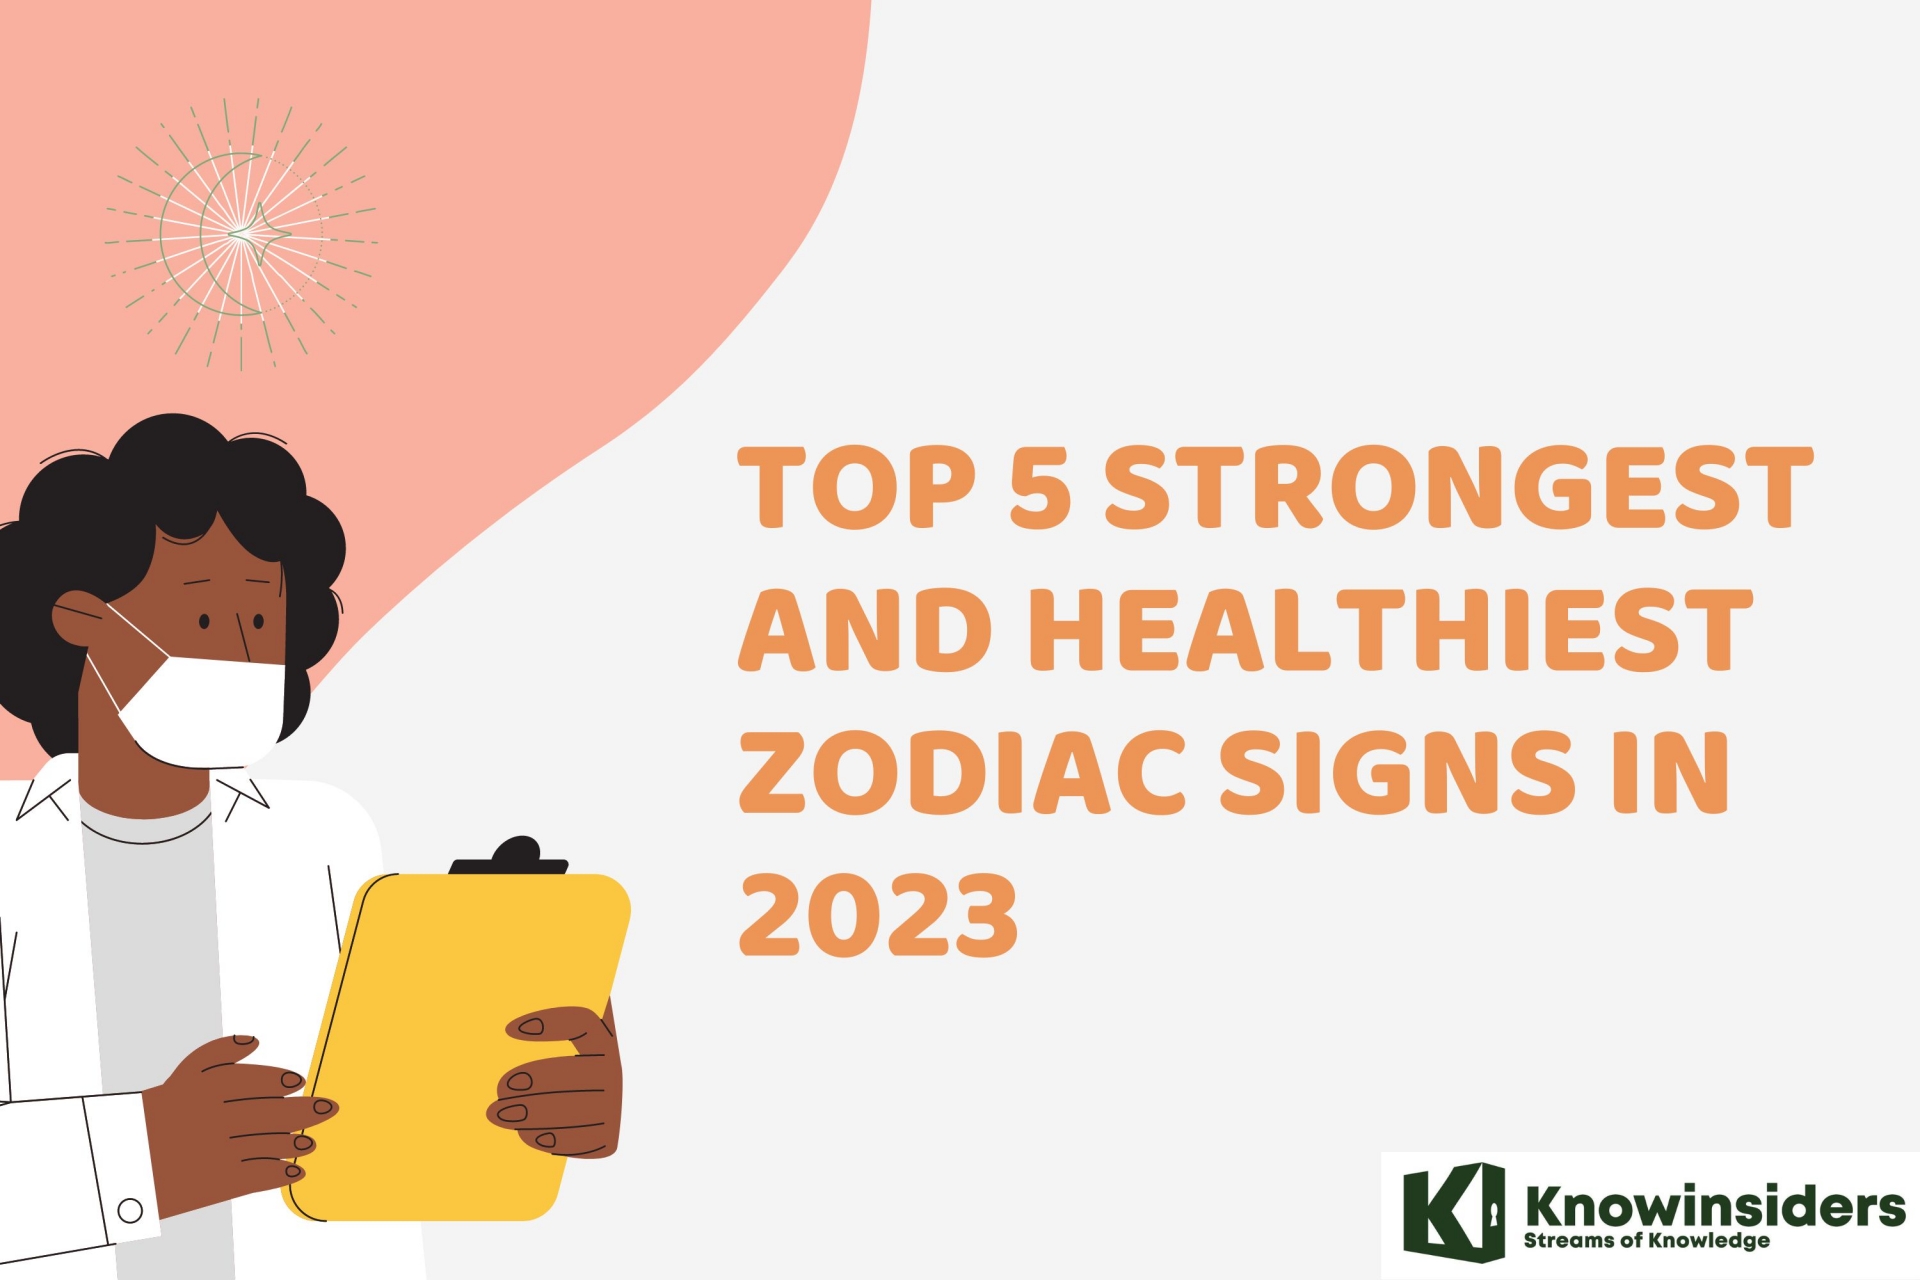 Top 5 Strongest and Healthiest Zodiac Signs in 2023